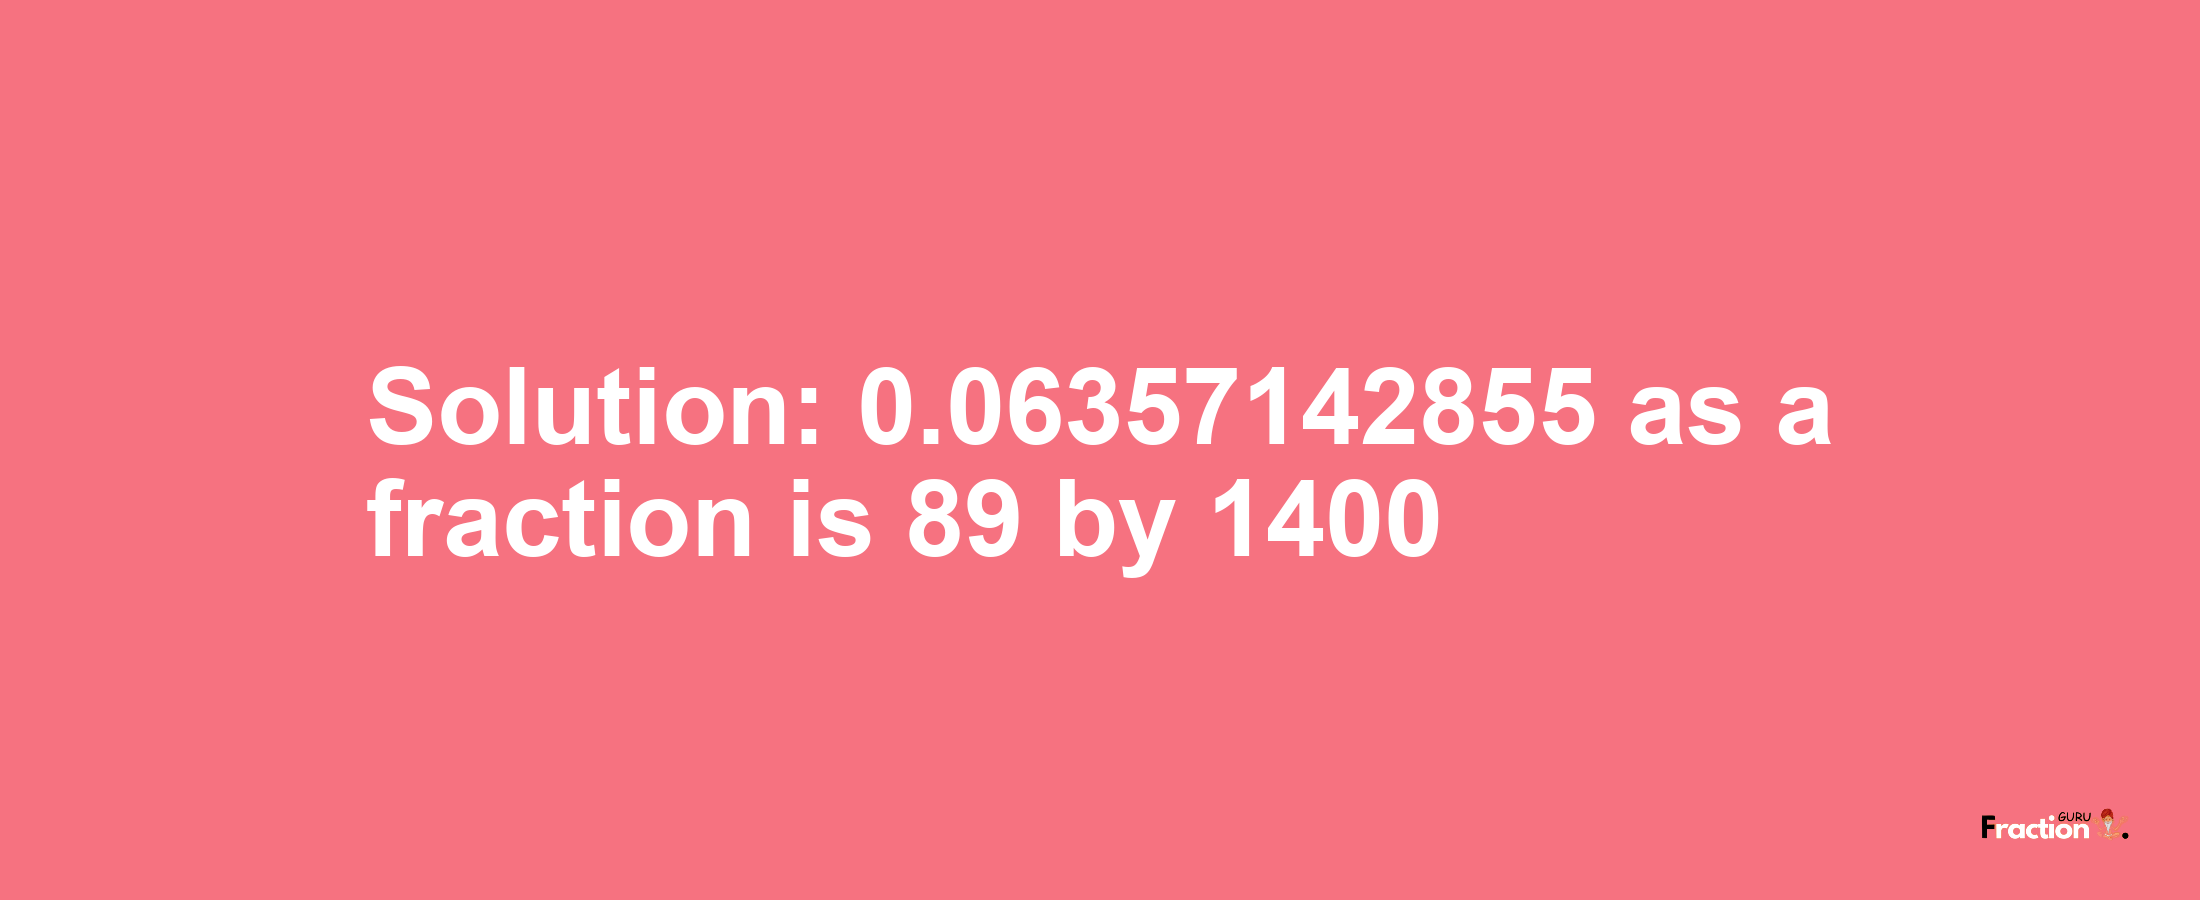 Solution:0.06357142855 as a fraction is 89/1400